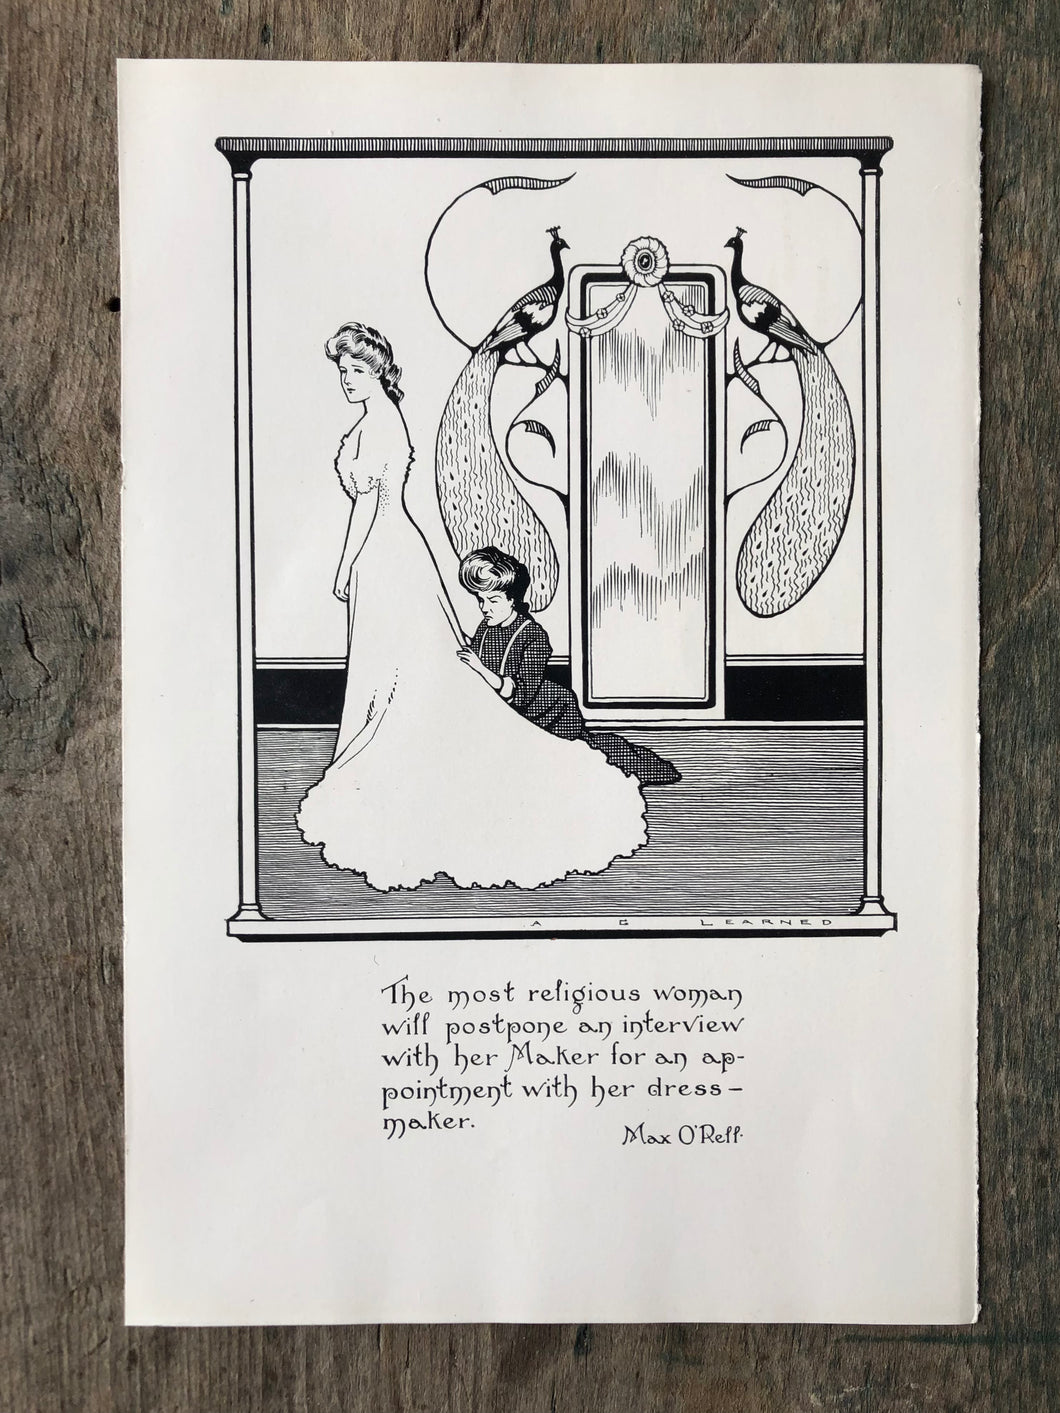 Max O’Rell Quote Print illustrated by Arthur G. Learned from “Eve’s Daughter”